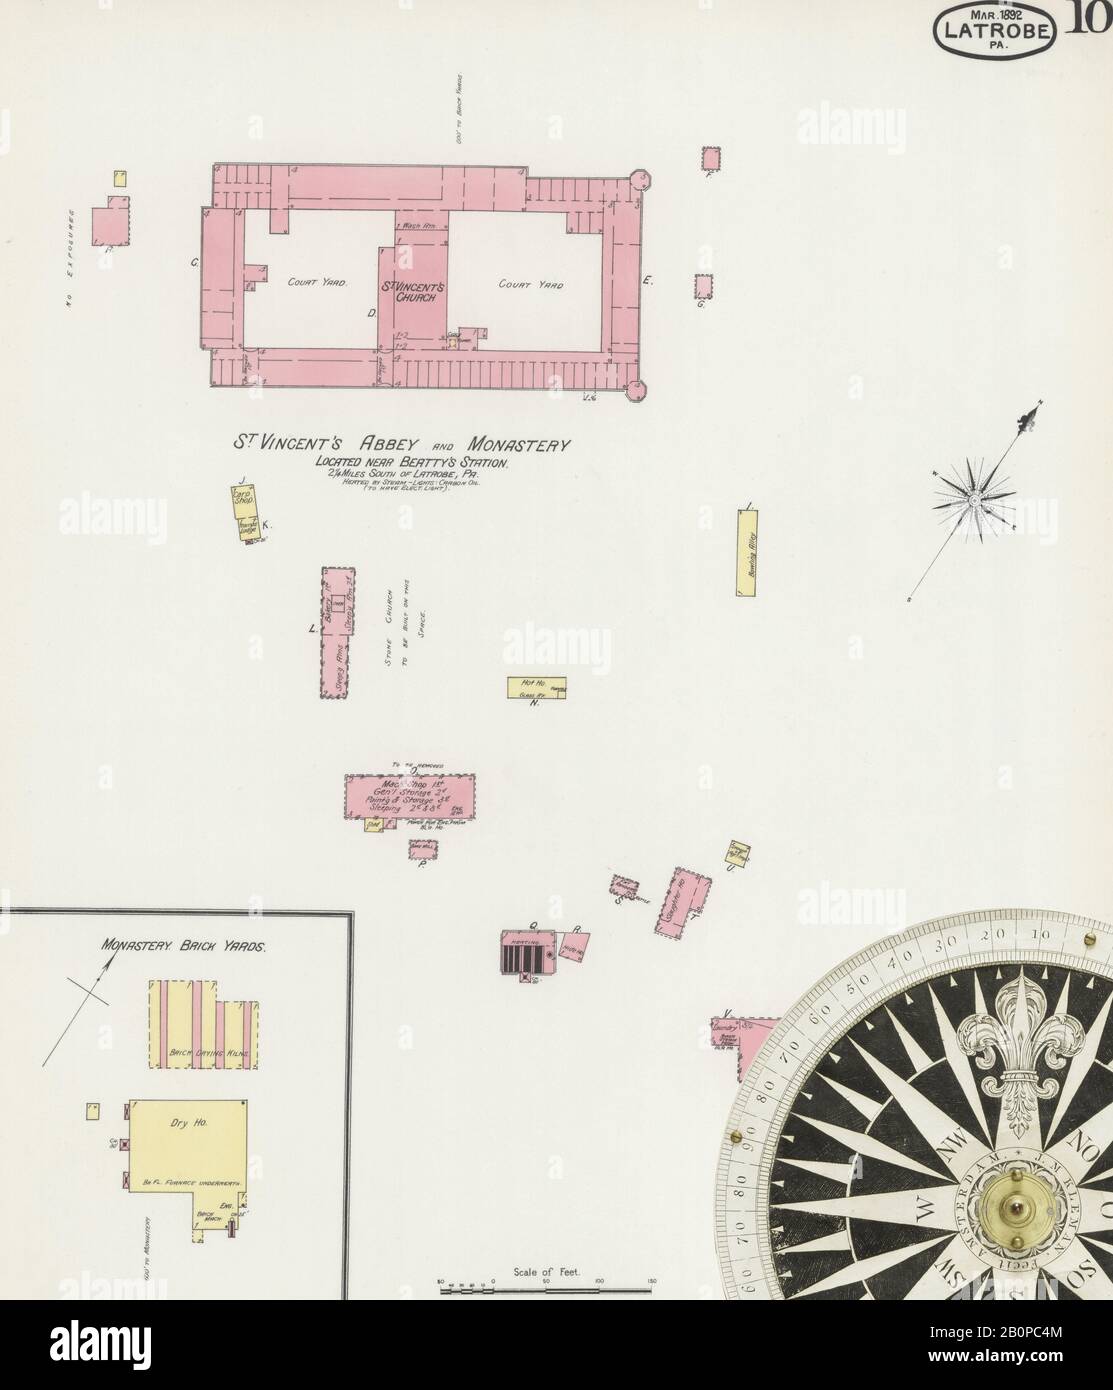 Image 10 of Sanborn Fire Insurance Map from Latrobe, Westmoreland County, Pennsylvania. Mar 1892. 11 Sheet(s), America, street map with a Nineteenth Century compass Stock Photo